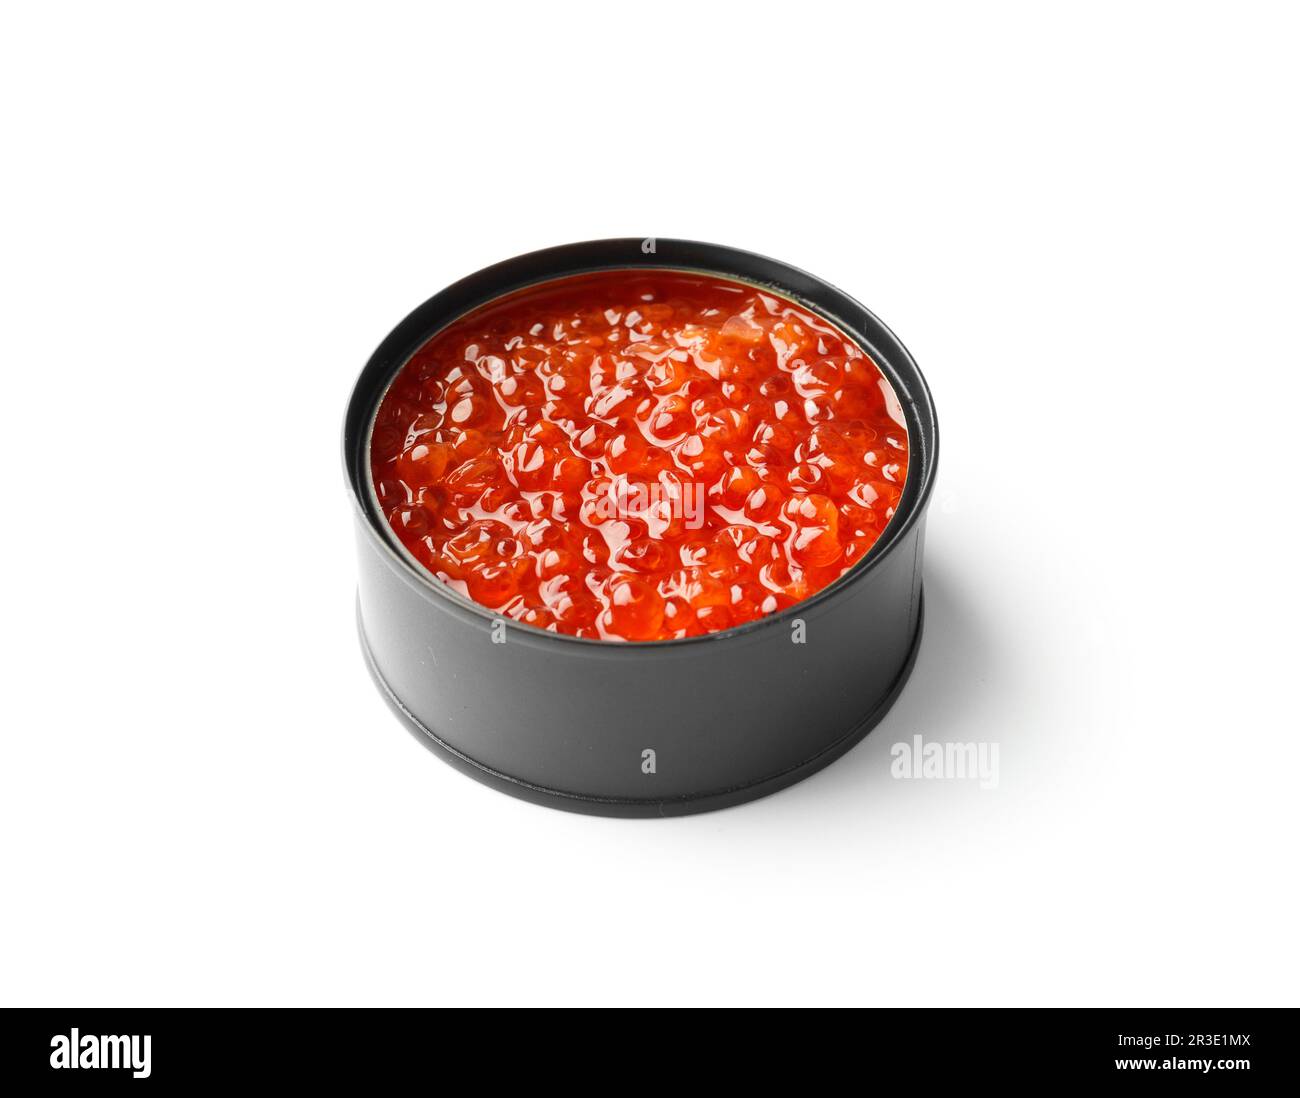 Red salmon caviar in an open black tin can on a white background. Useful delicacy seafood, canned fish. Stock Photo